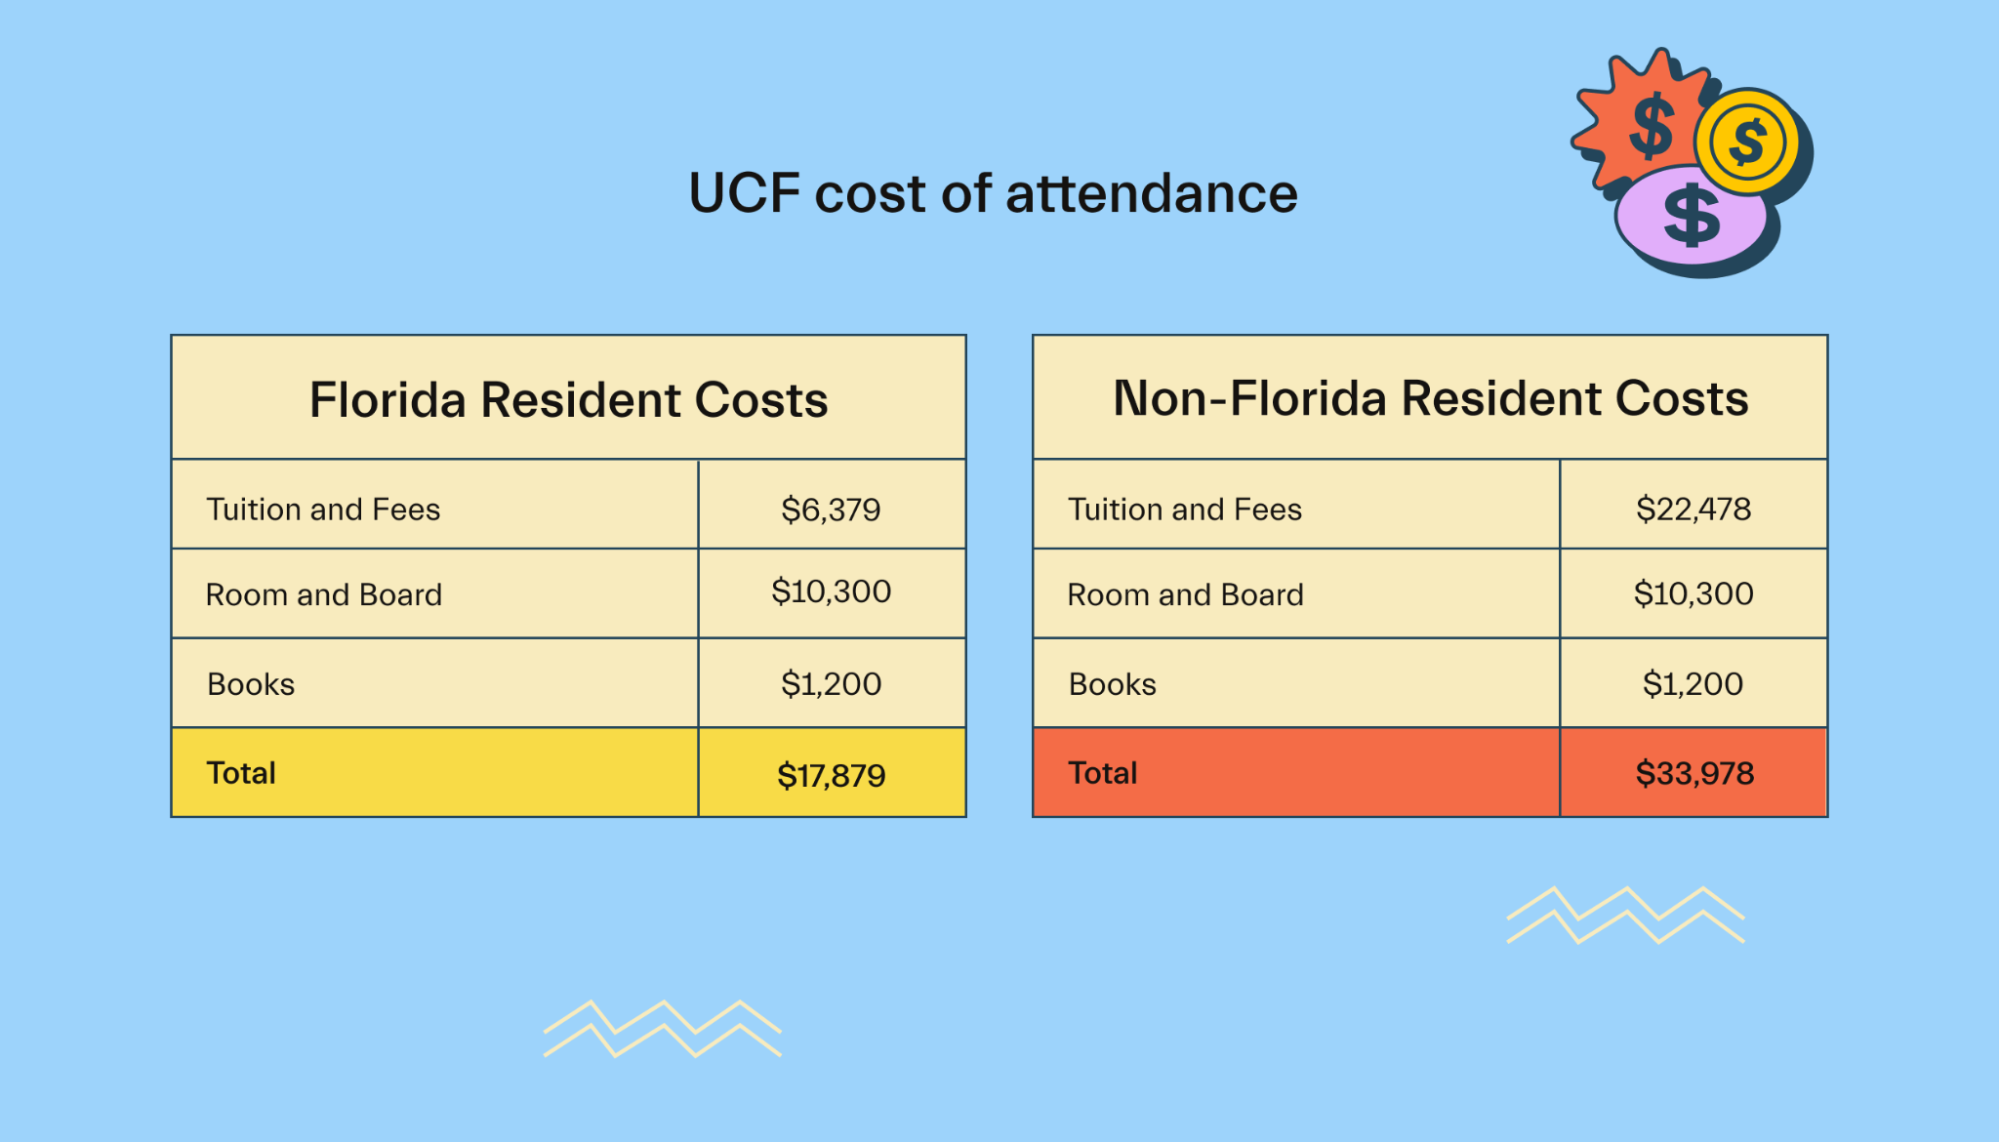 UCF cost of attendance